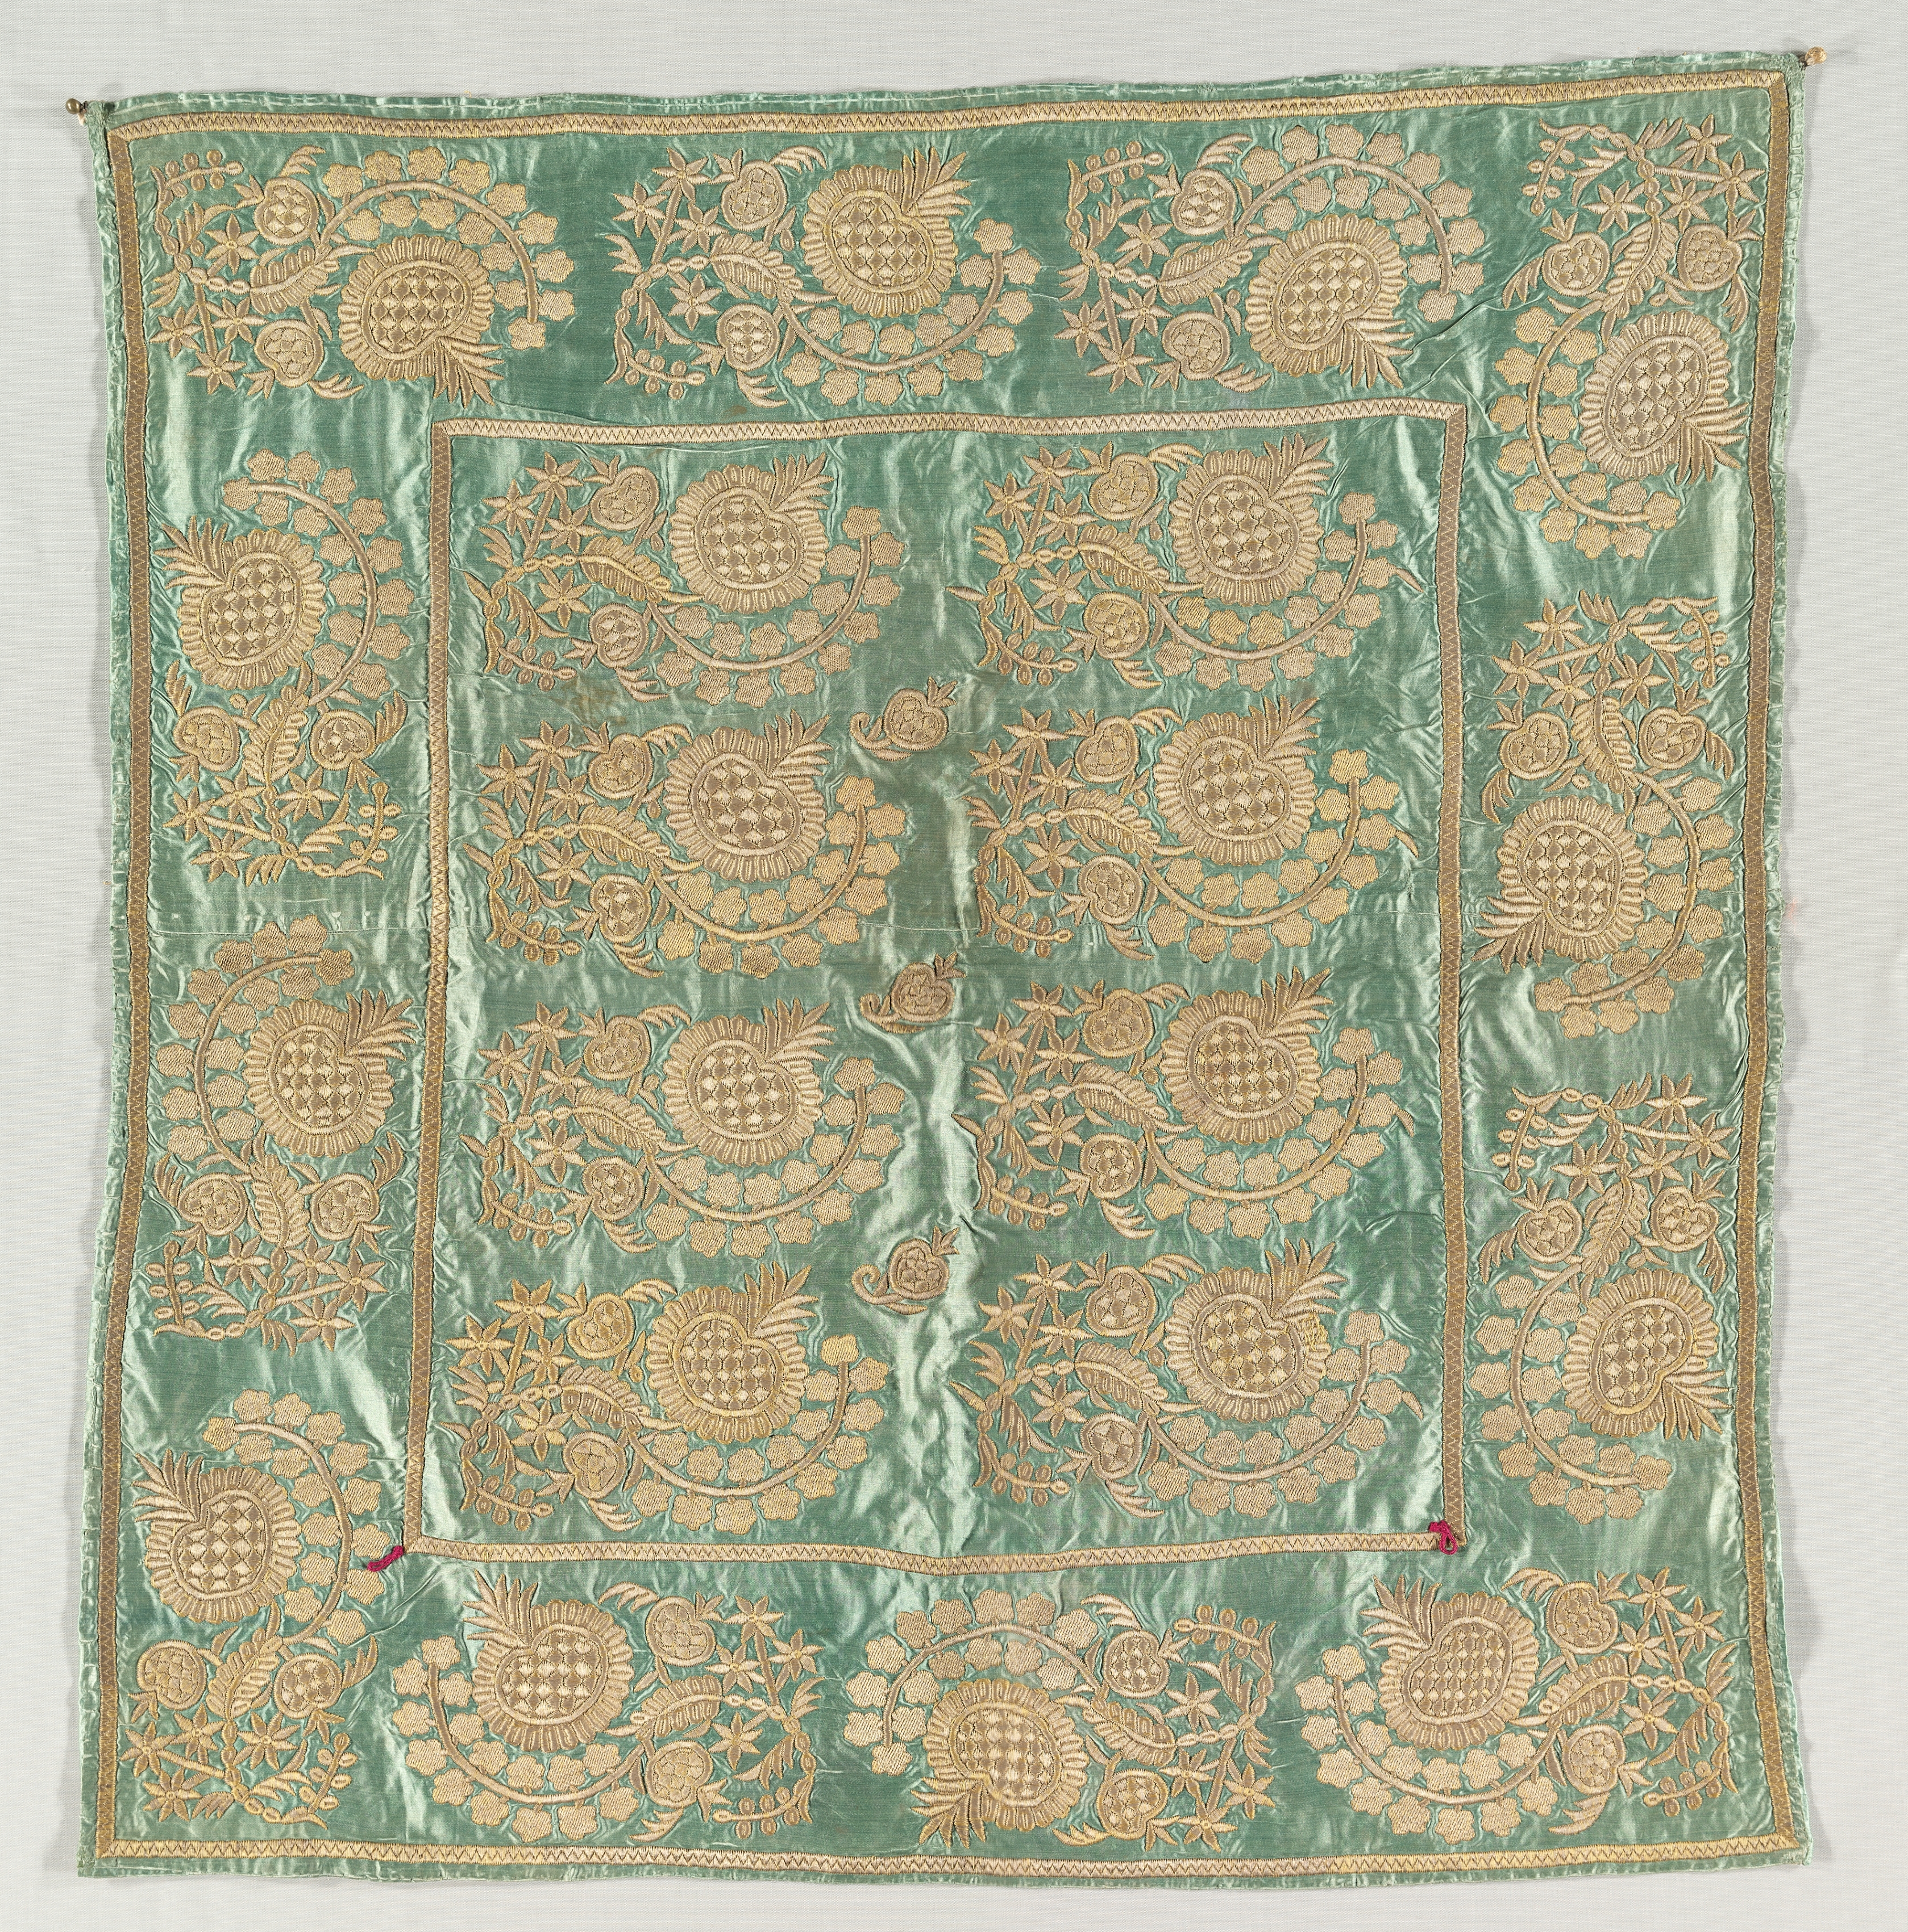 Embroidered envelope with closures